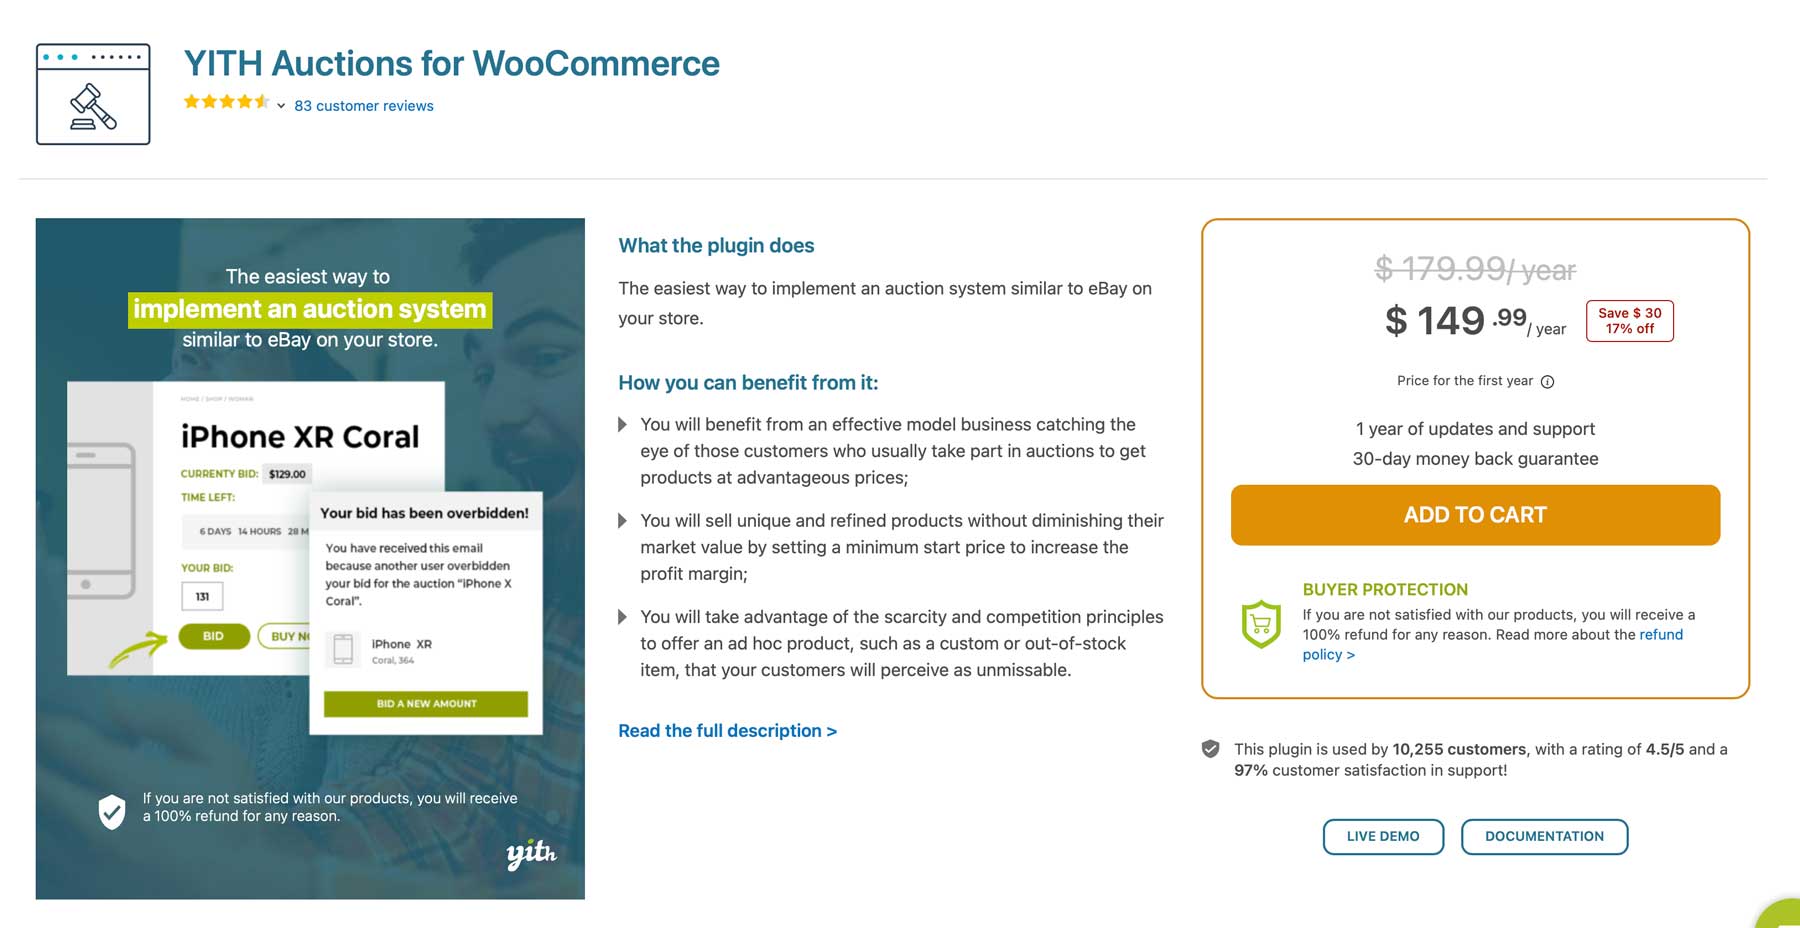 YITH Auctions for WooCommerce plugin